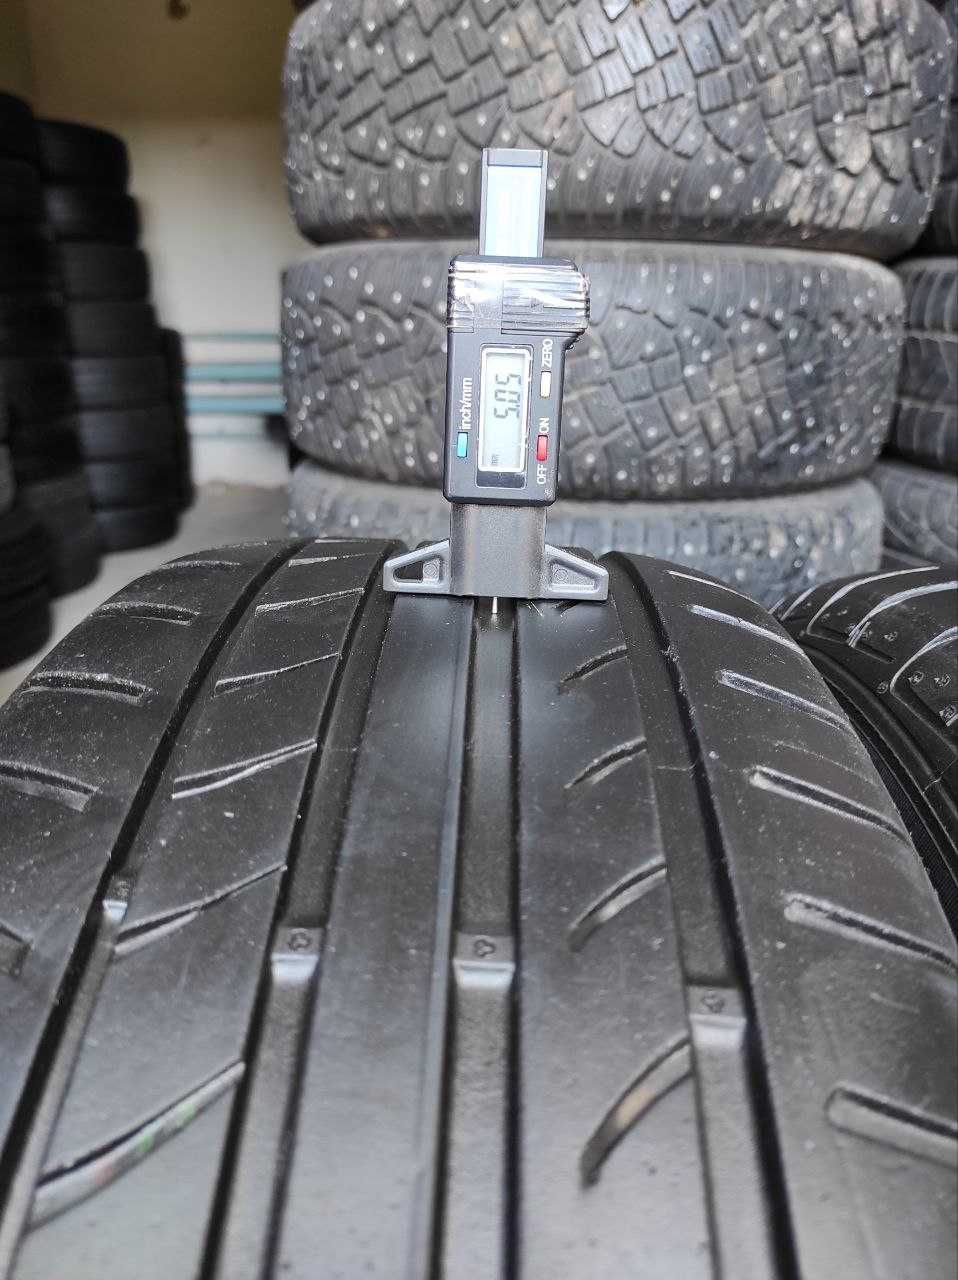 Dunlop SP Sport Maxx TT 225/60r17 made in Germany 2шт 17год, 5мм, ЛЕТО